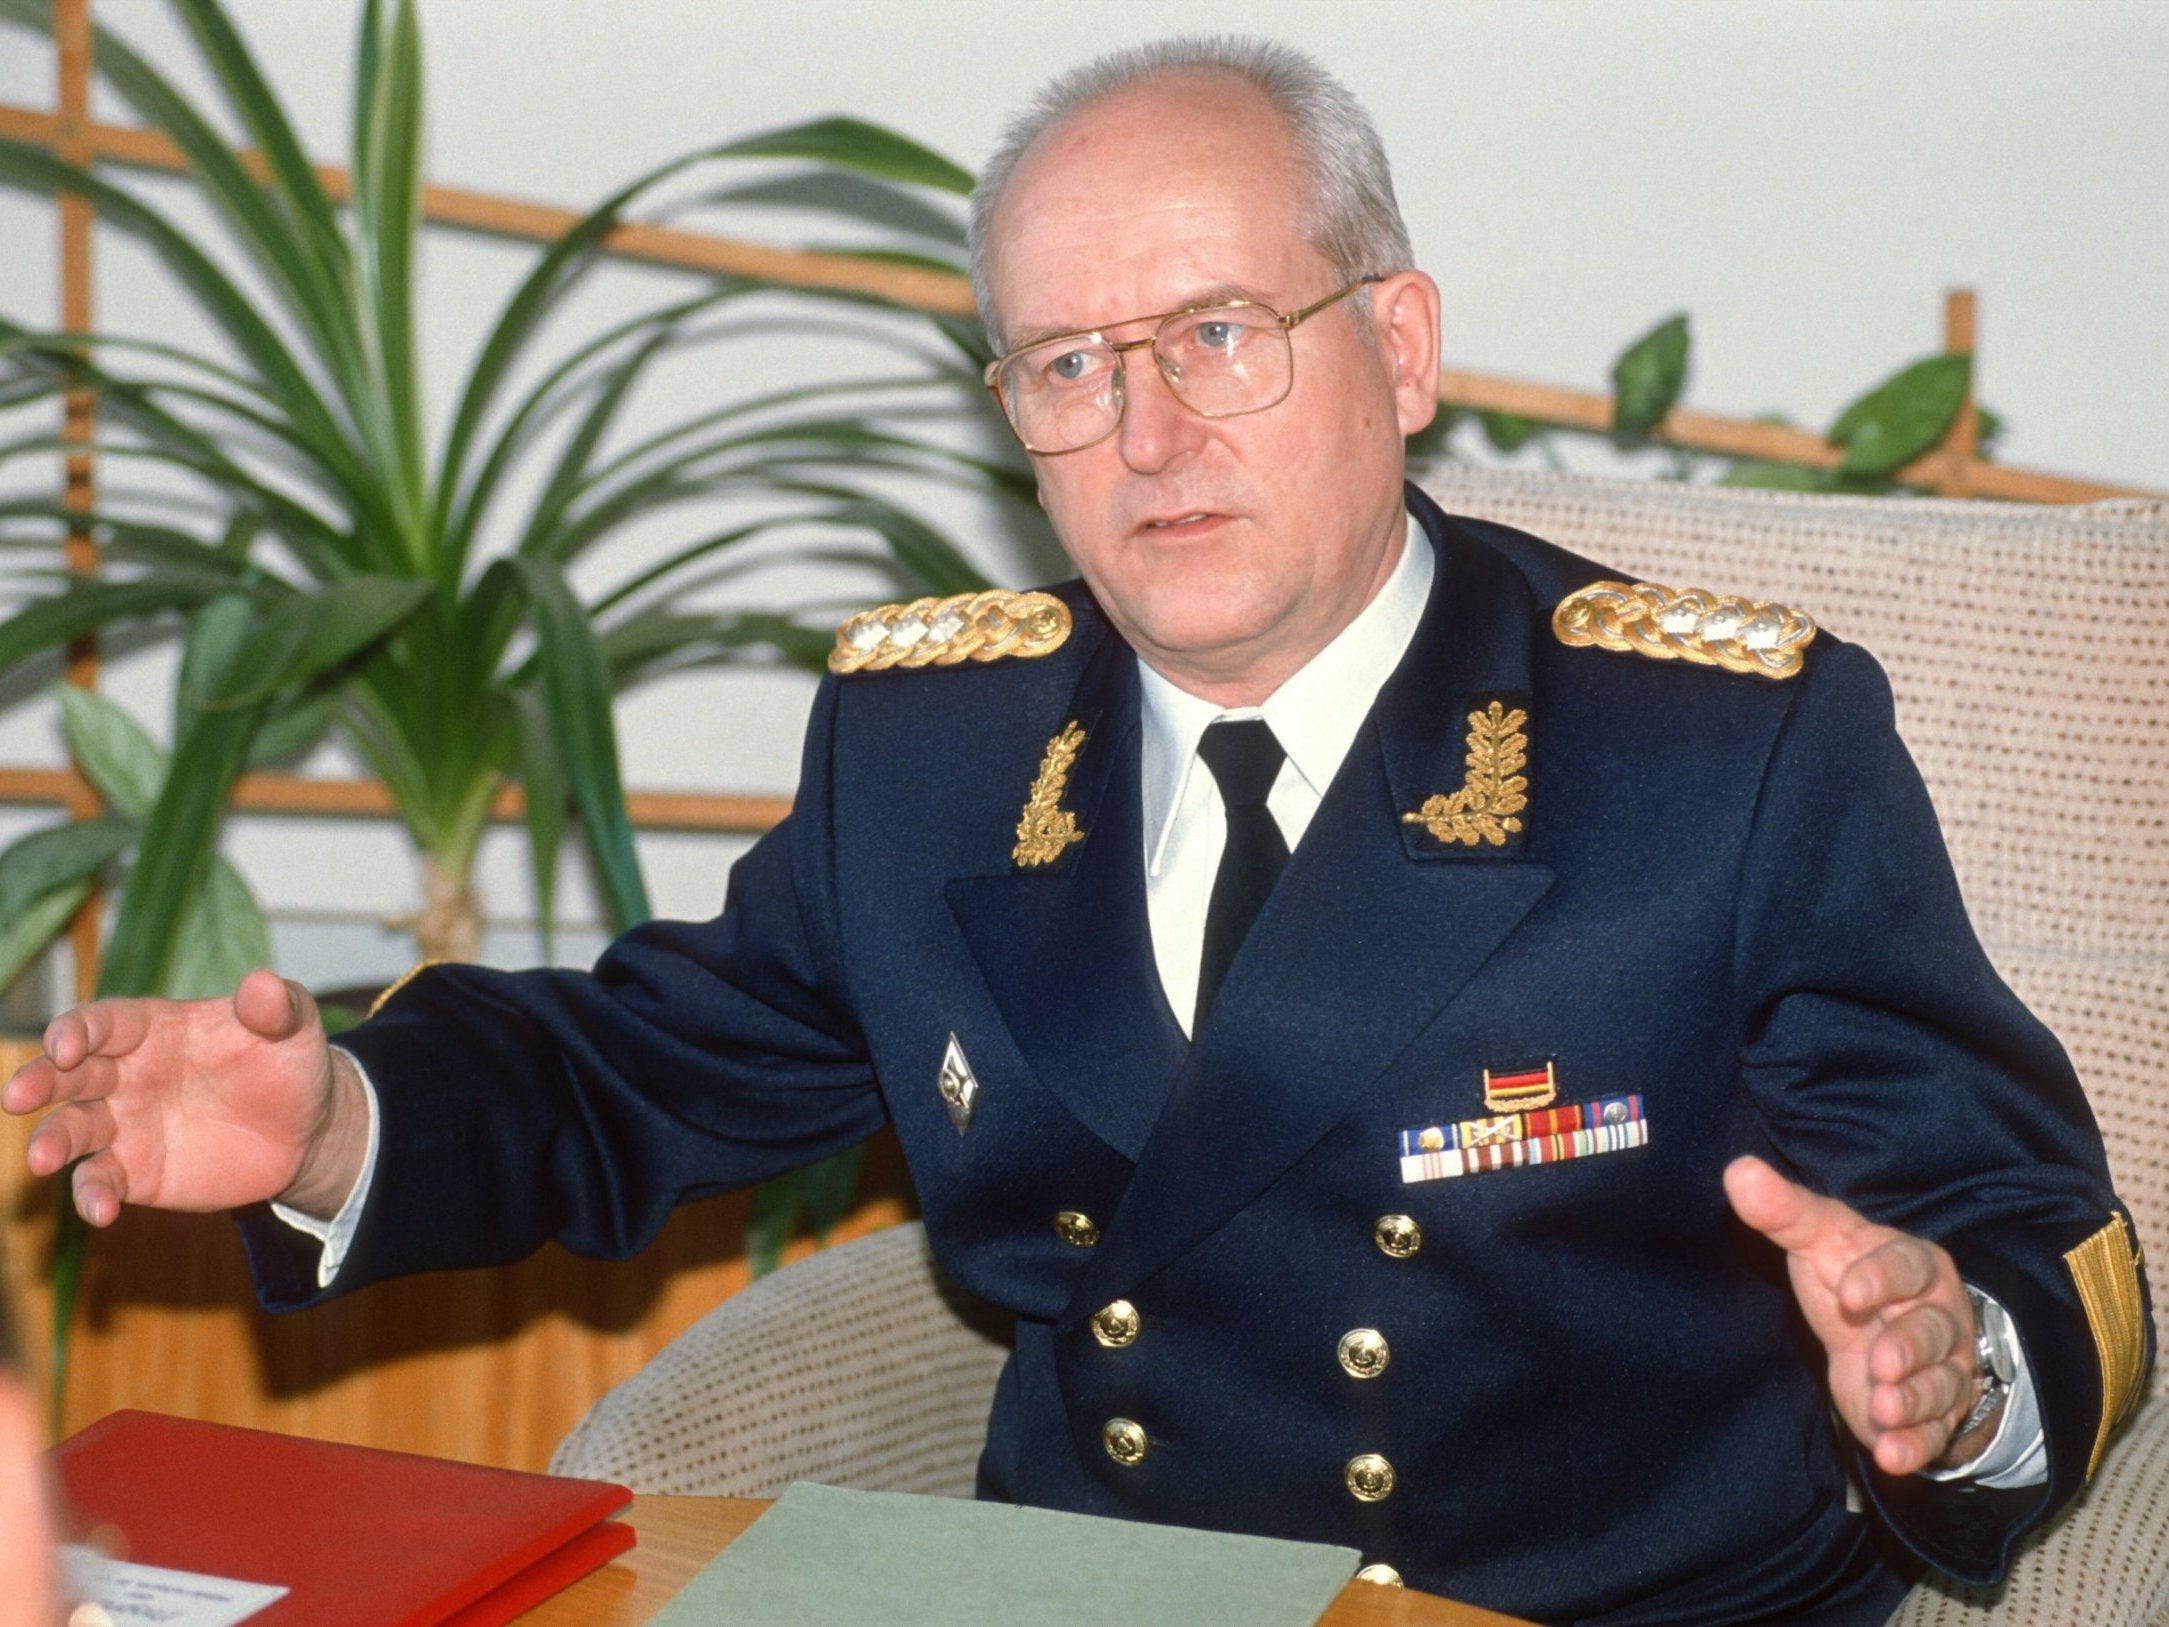 Hoffmann in 1991. During his brief tenure he abolished the grandiose parades that had been a regular feature of East German military life